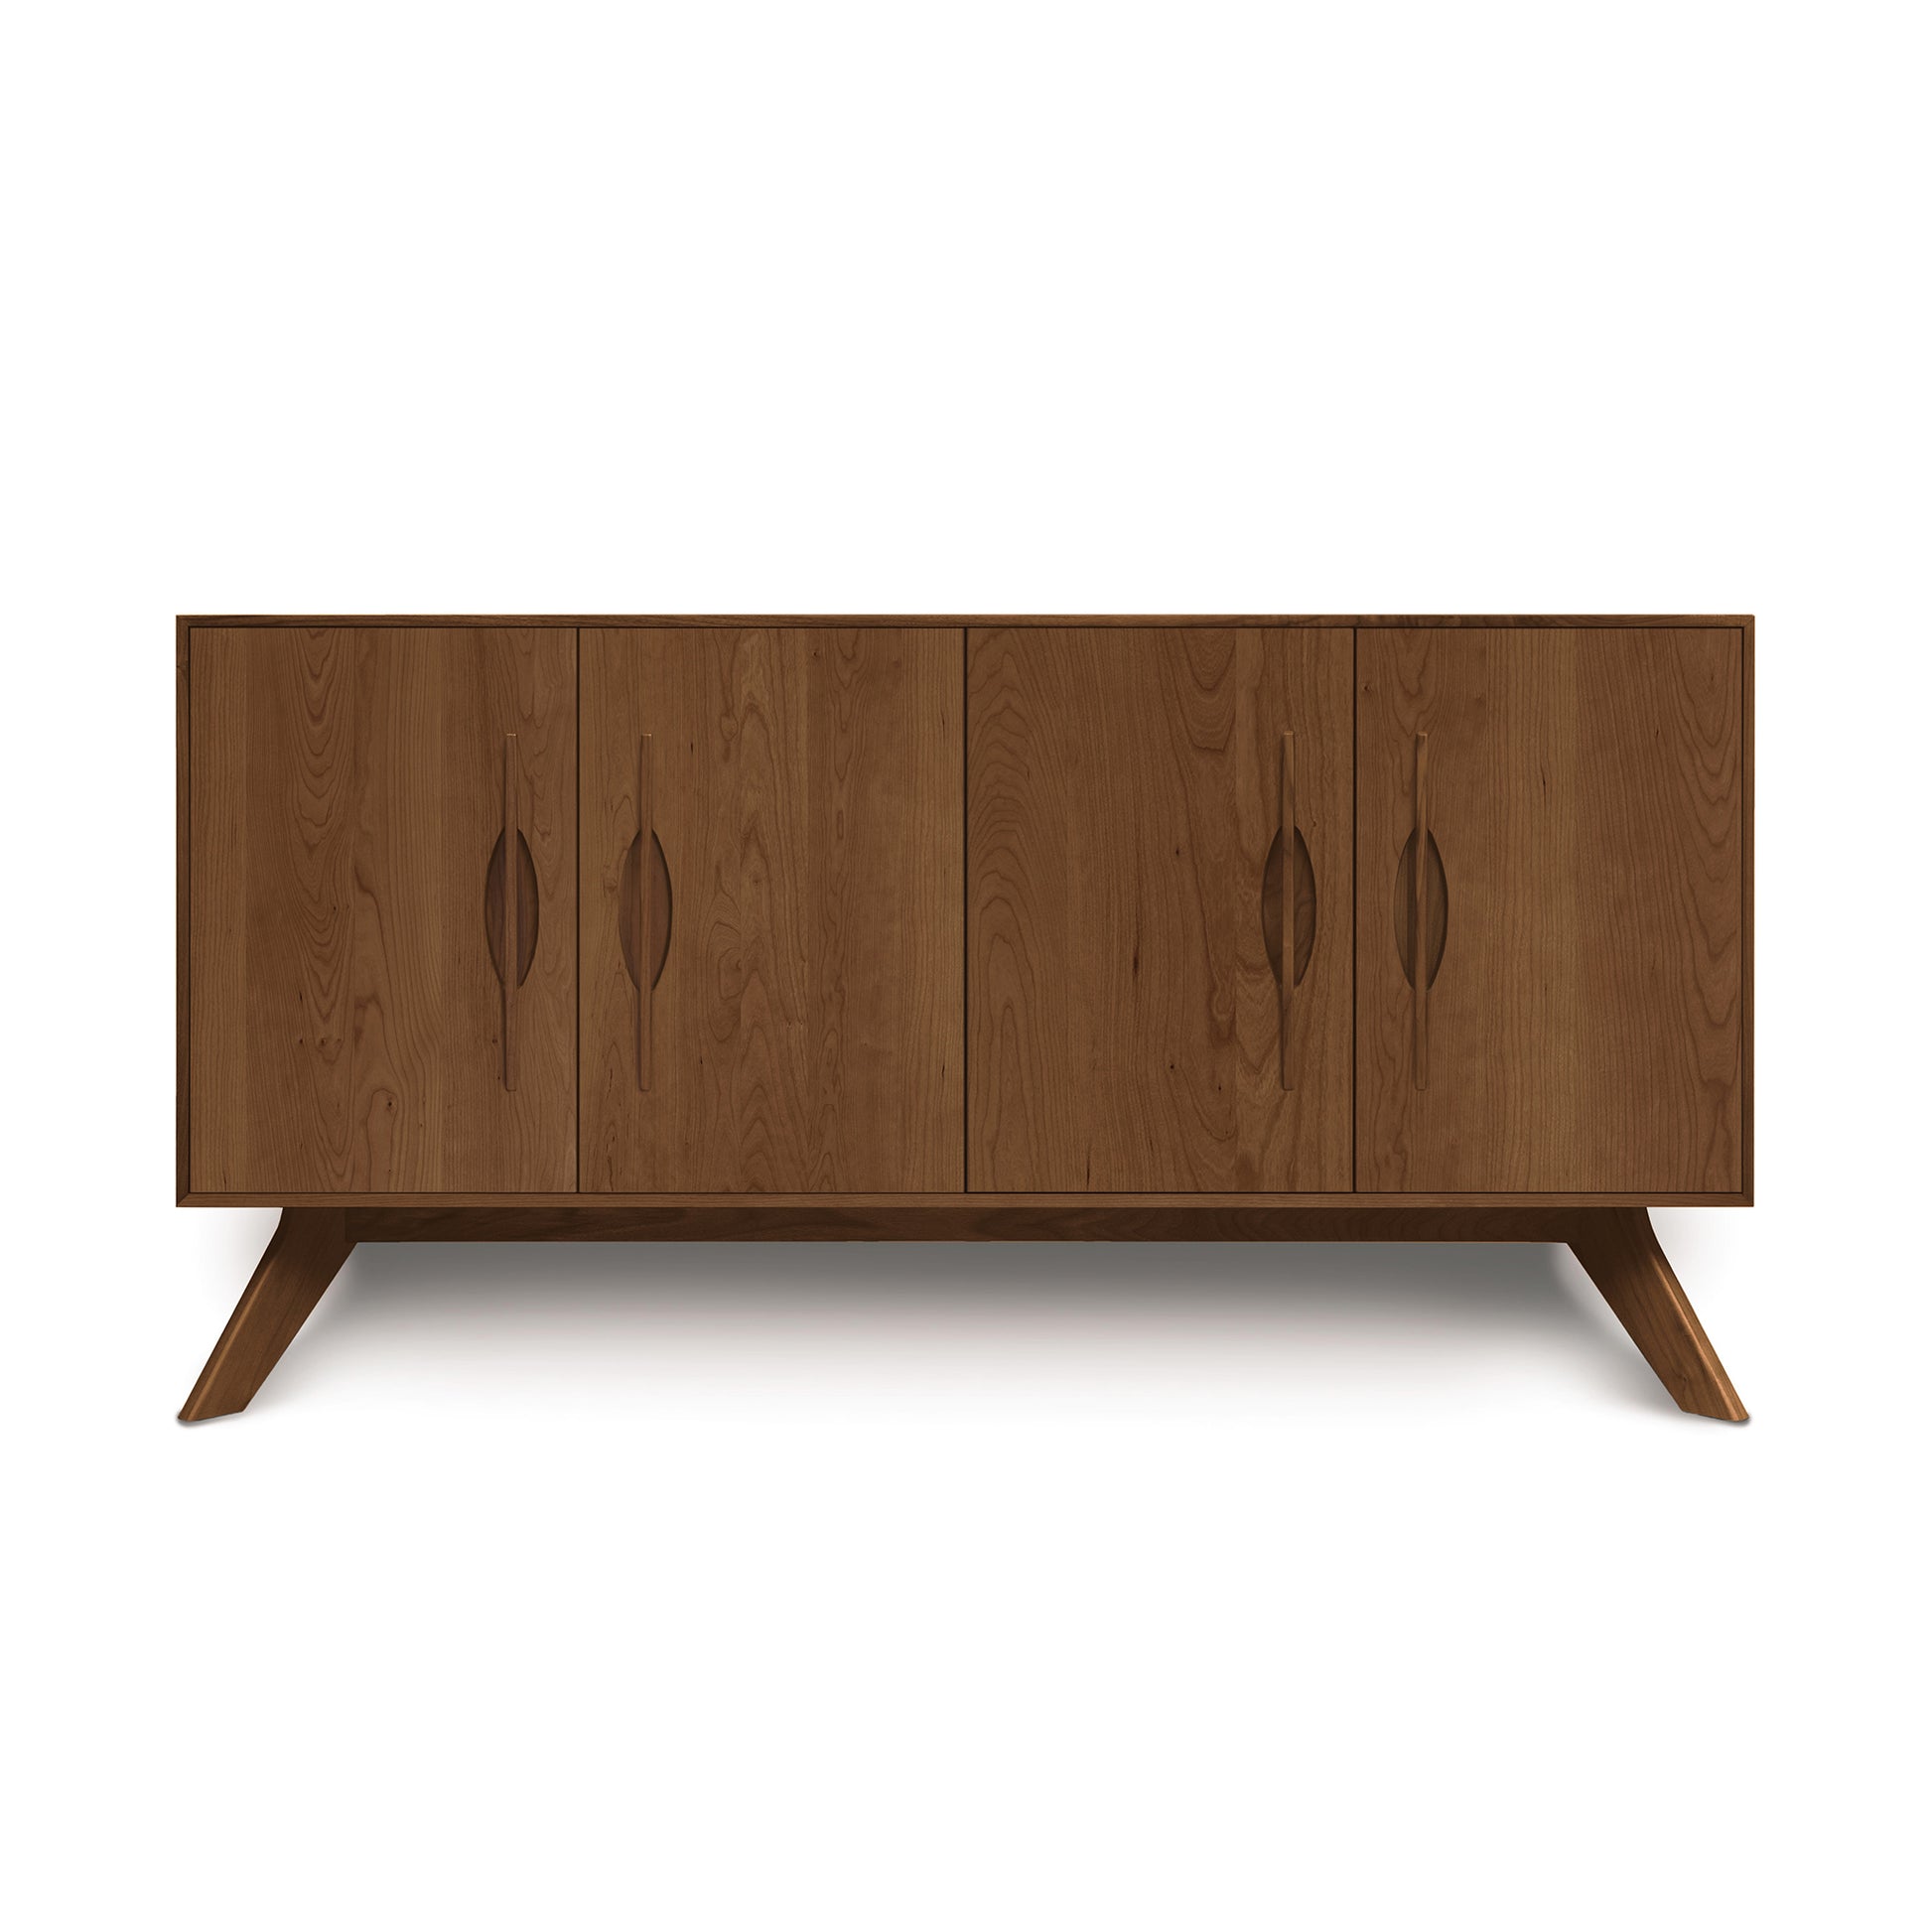 A solid wood Copeland Furniture Audrey 4-Door Buffet with angled legs on a white background.